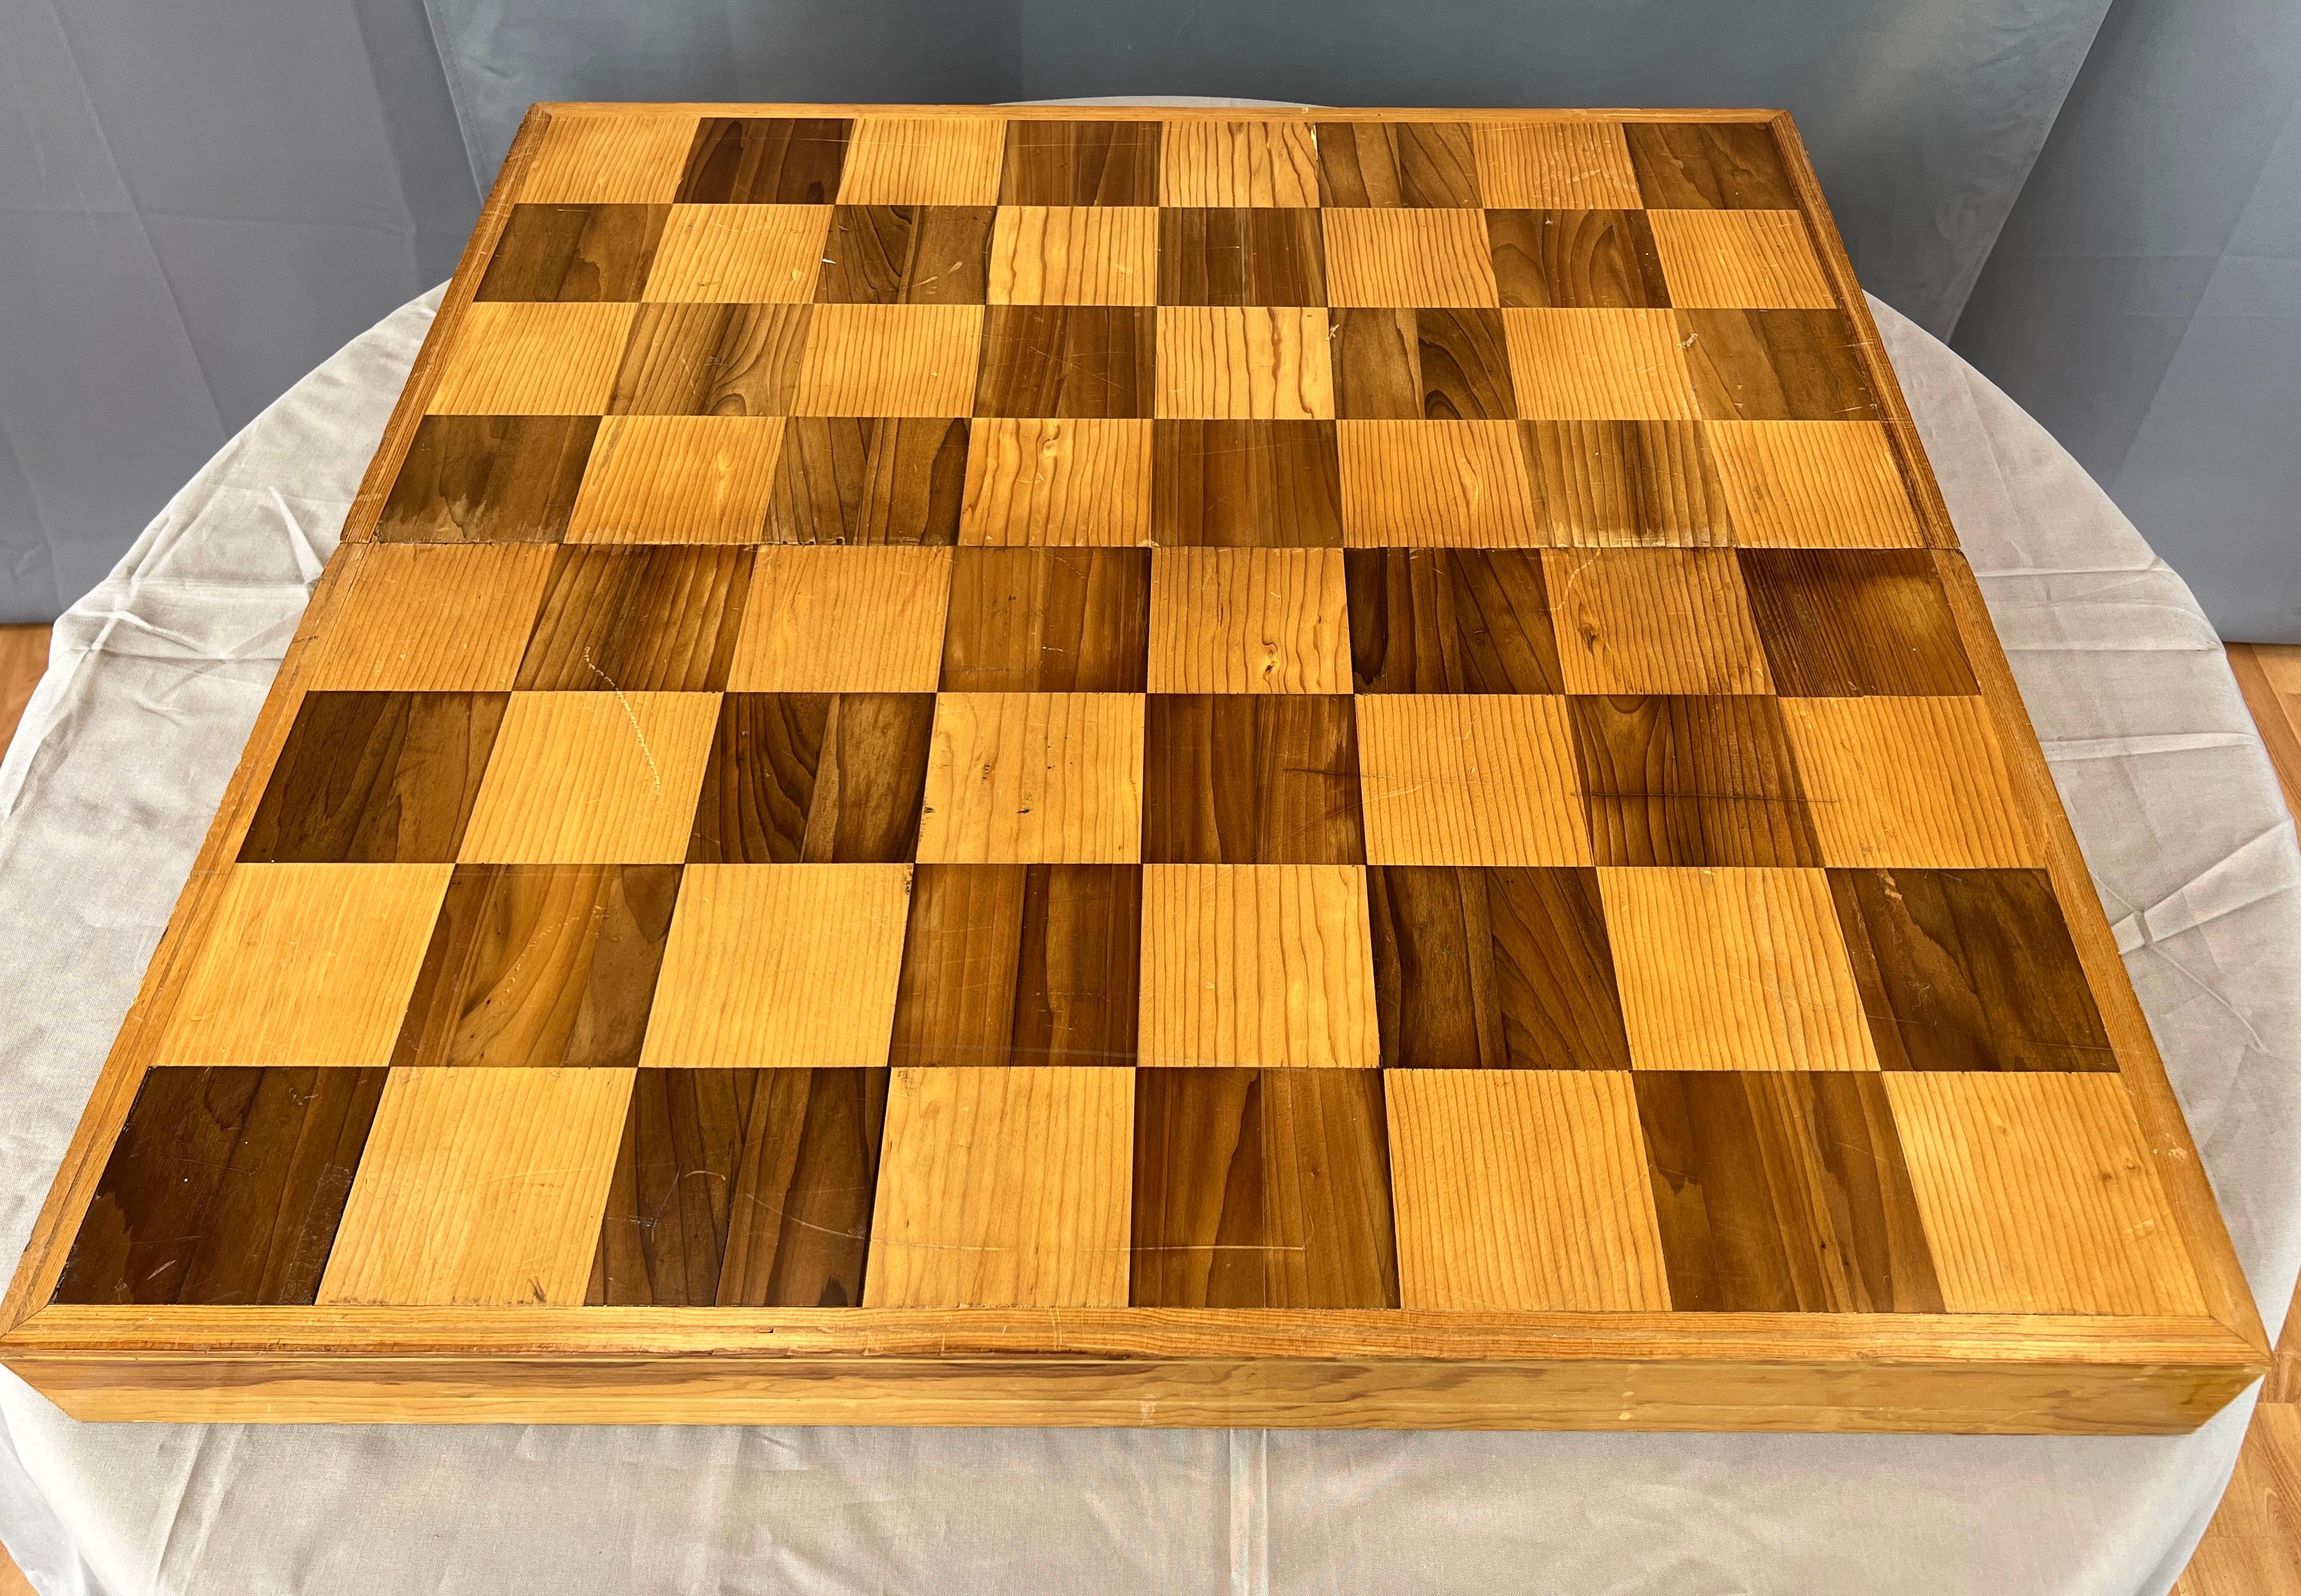 Unique & Monumental Hand Crafted Wooden Chess Set 33pc 8